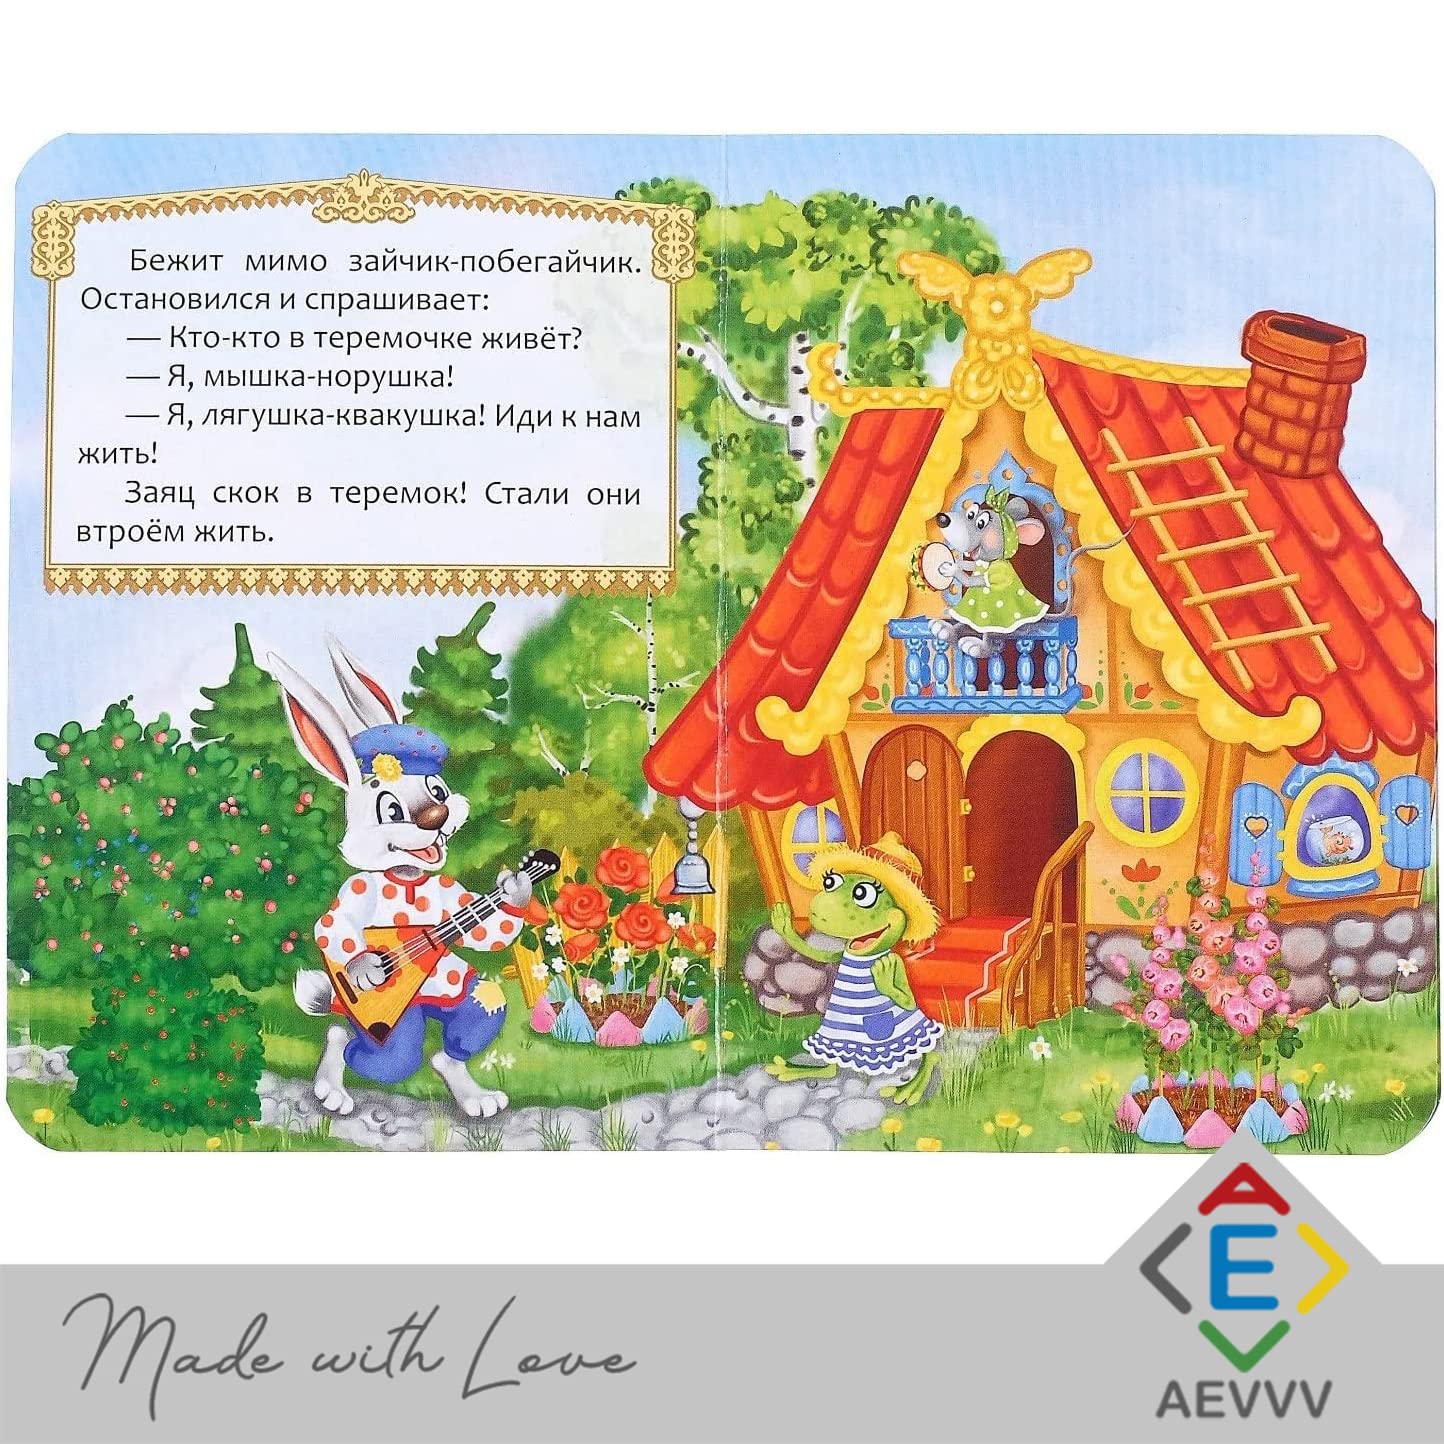 AEVVV Russkie Narodnye Skazki Set of 6 Books - Russian Folk Tales - Russian Fairy Tales - Русские Народные Сказки На Русском Языке - Russian Books for Kids